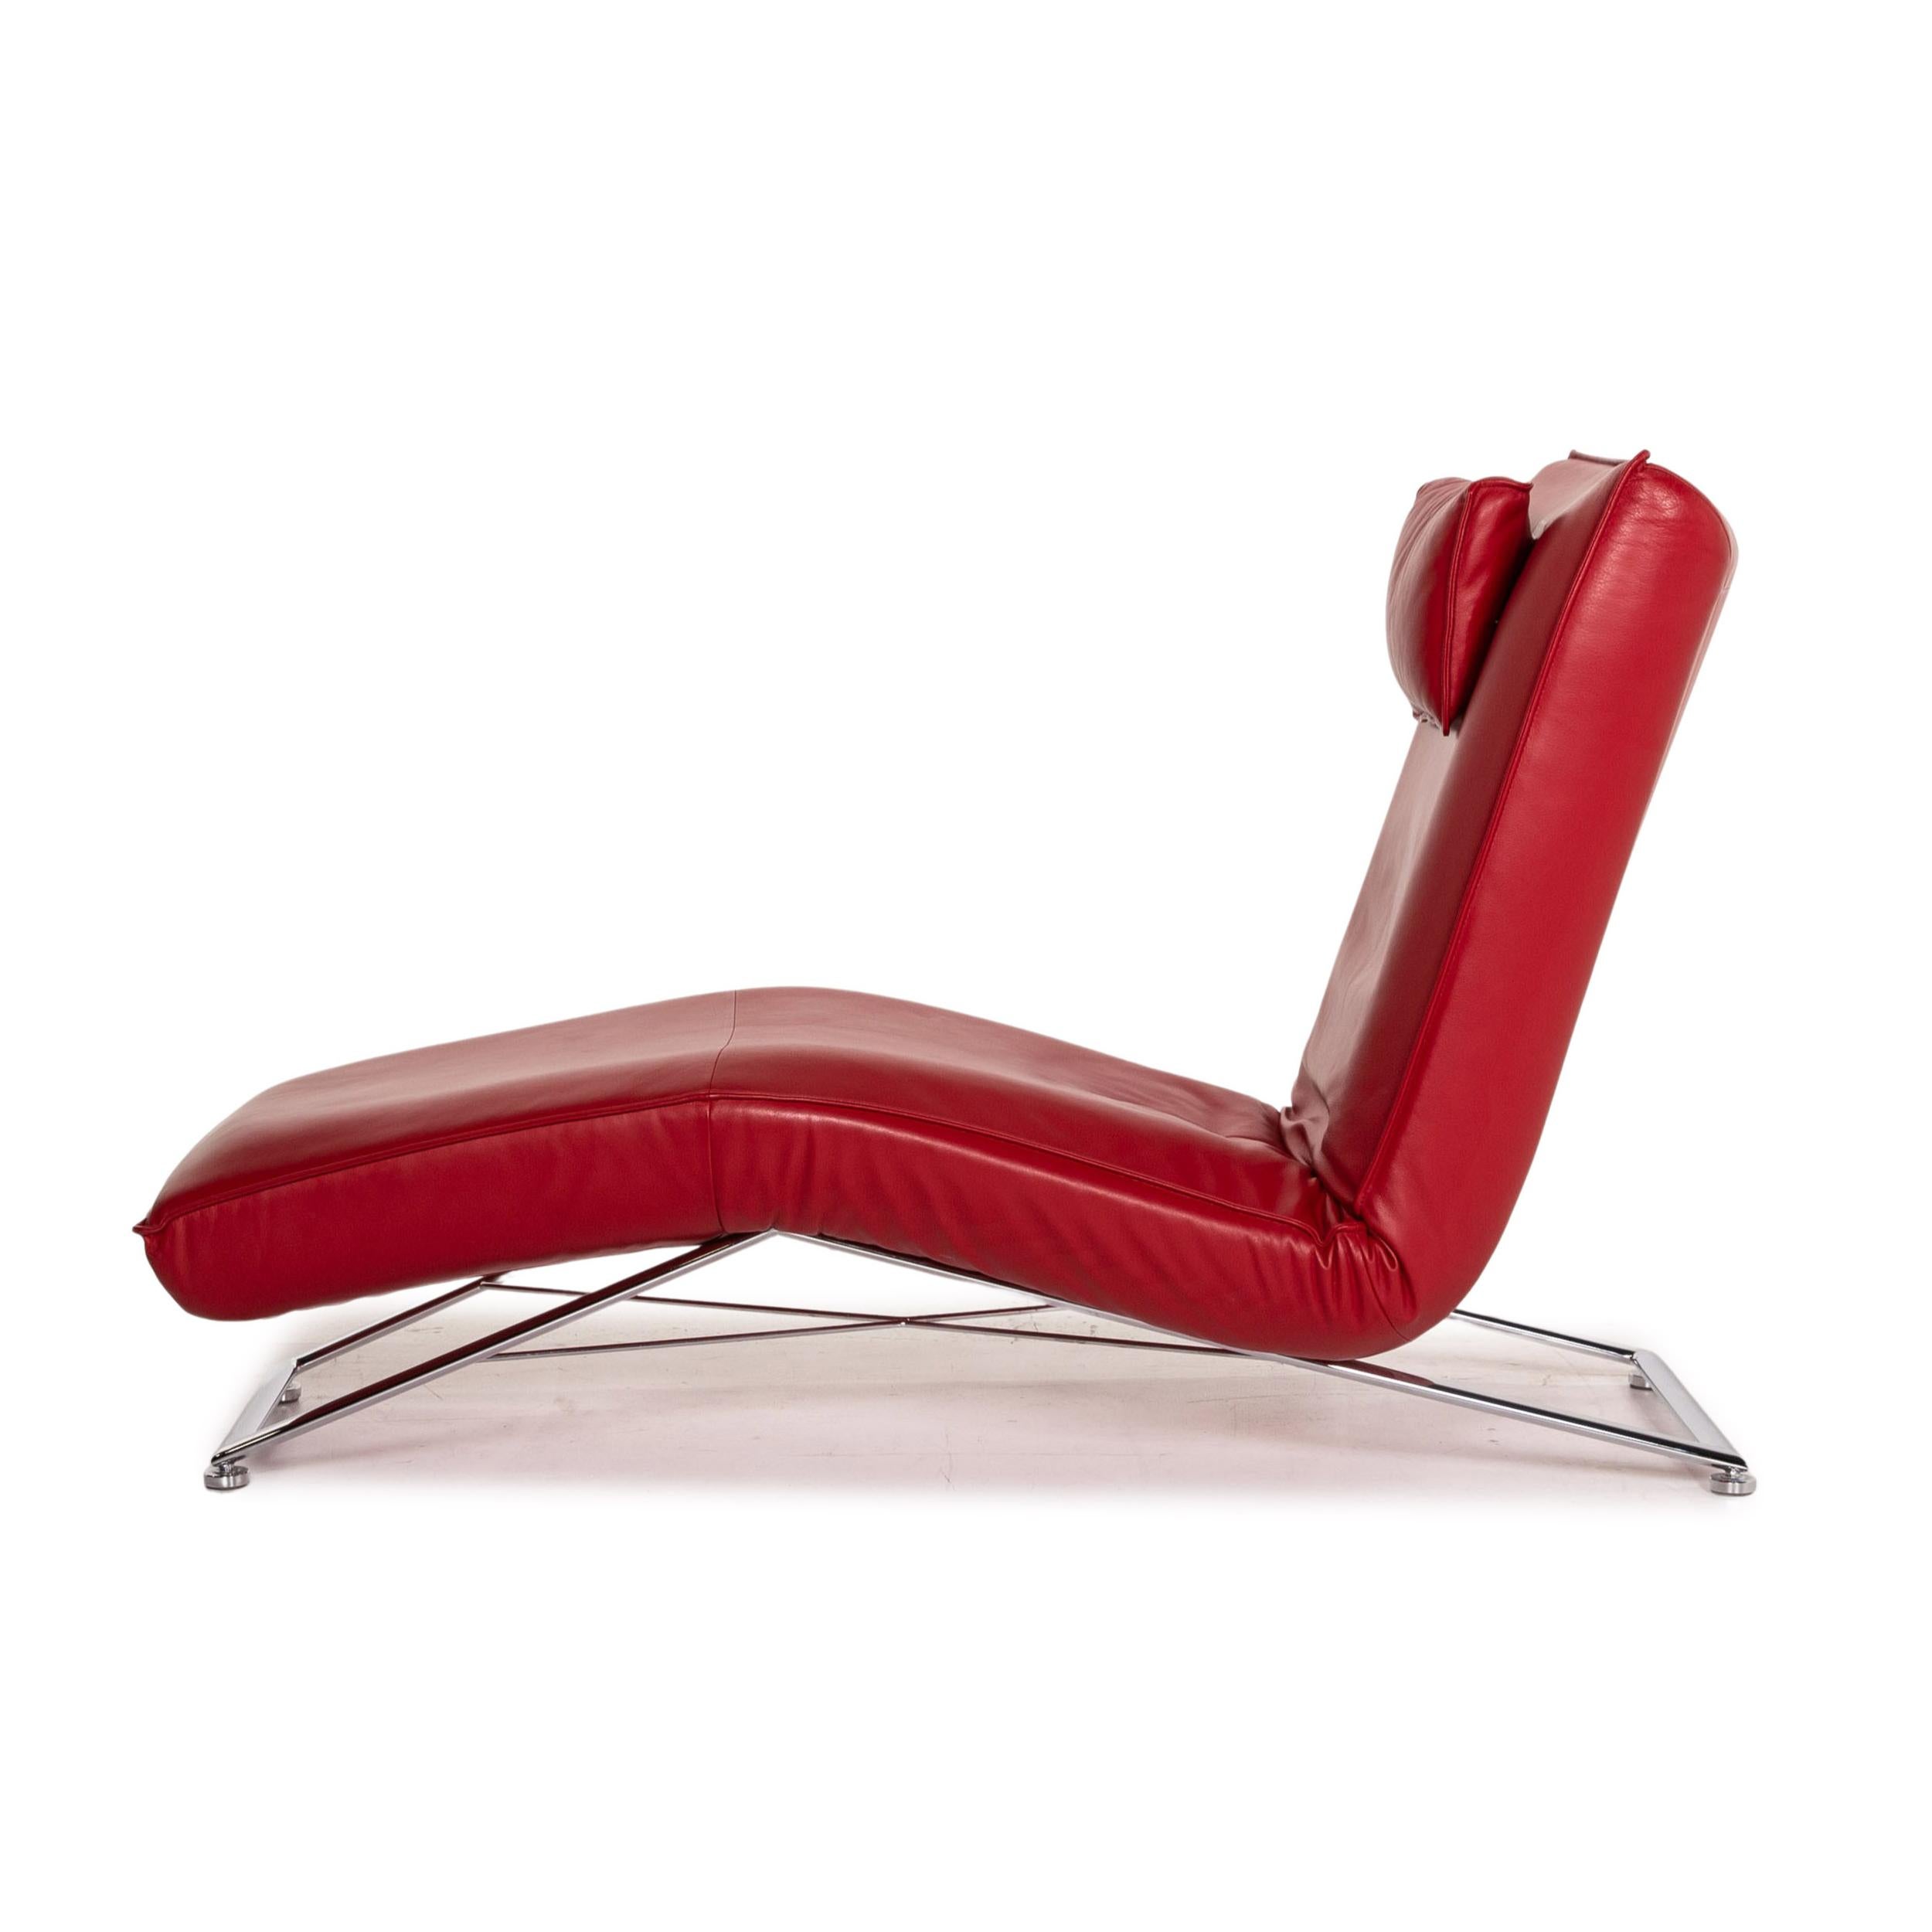 KoinorJeremiah Leather Lounger Red Relaxation Function Relaxation Lounger 6